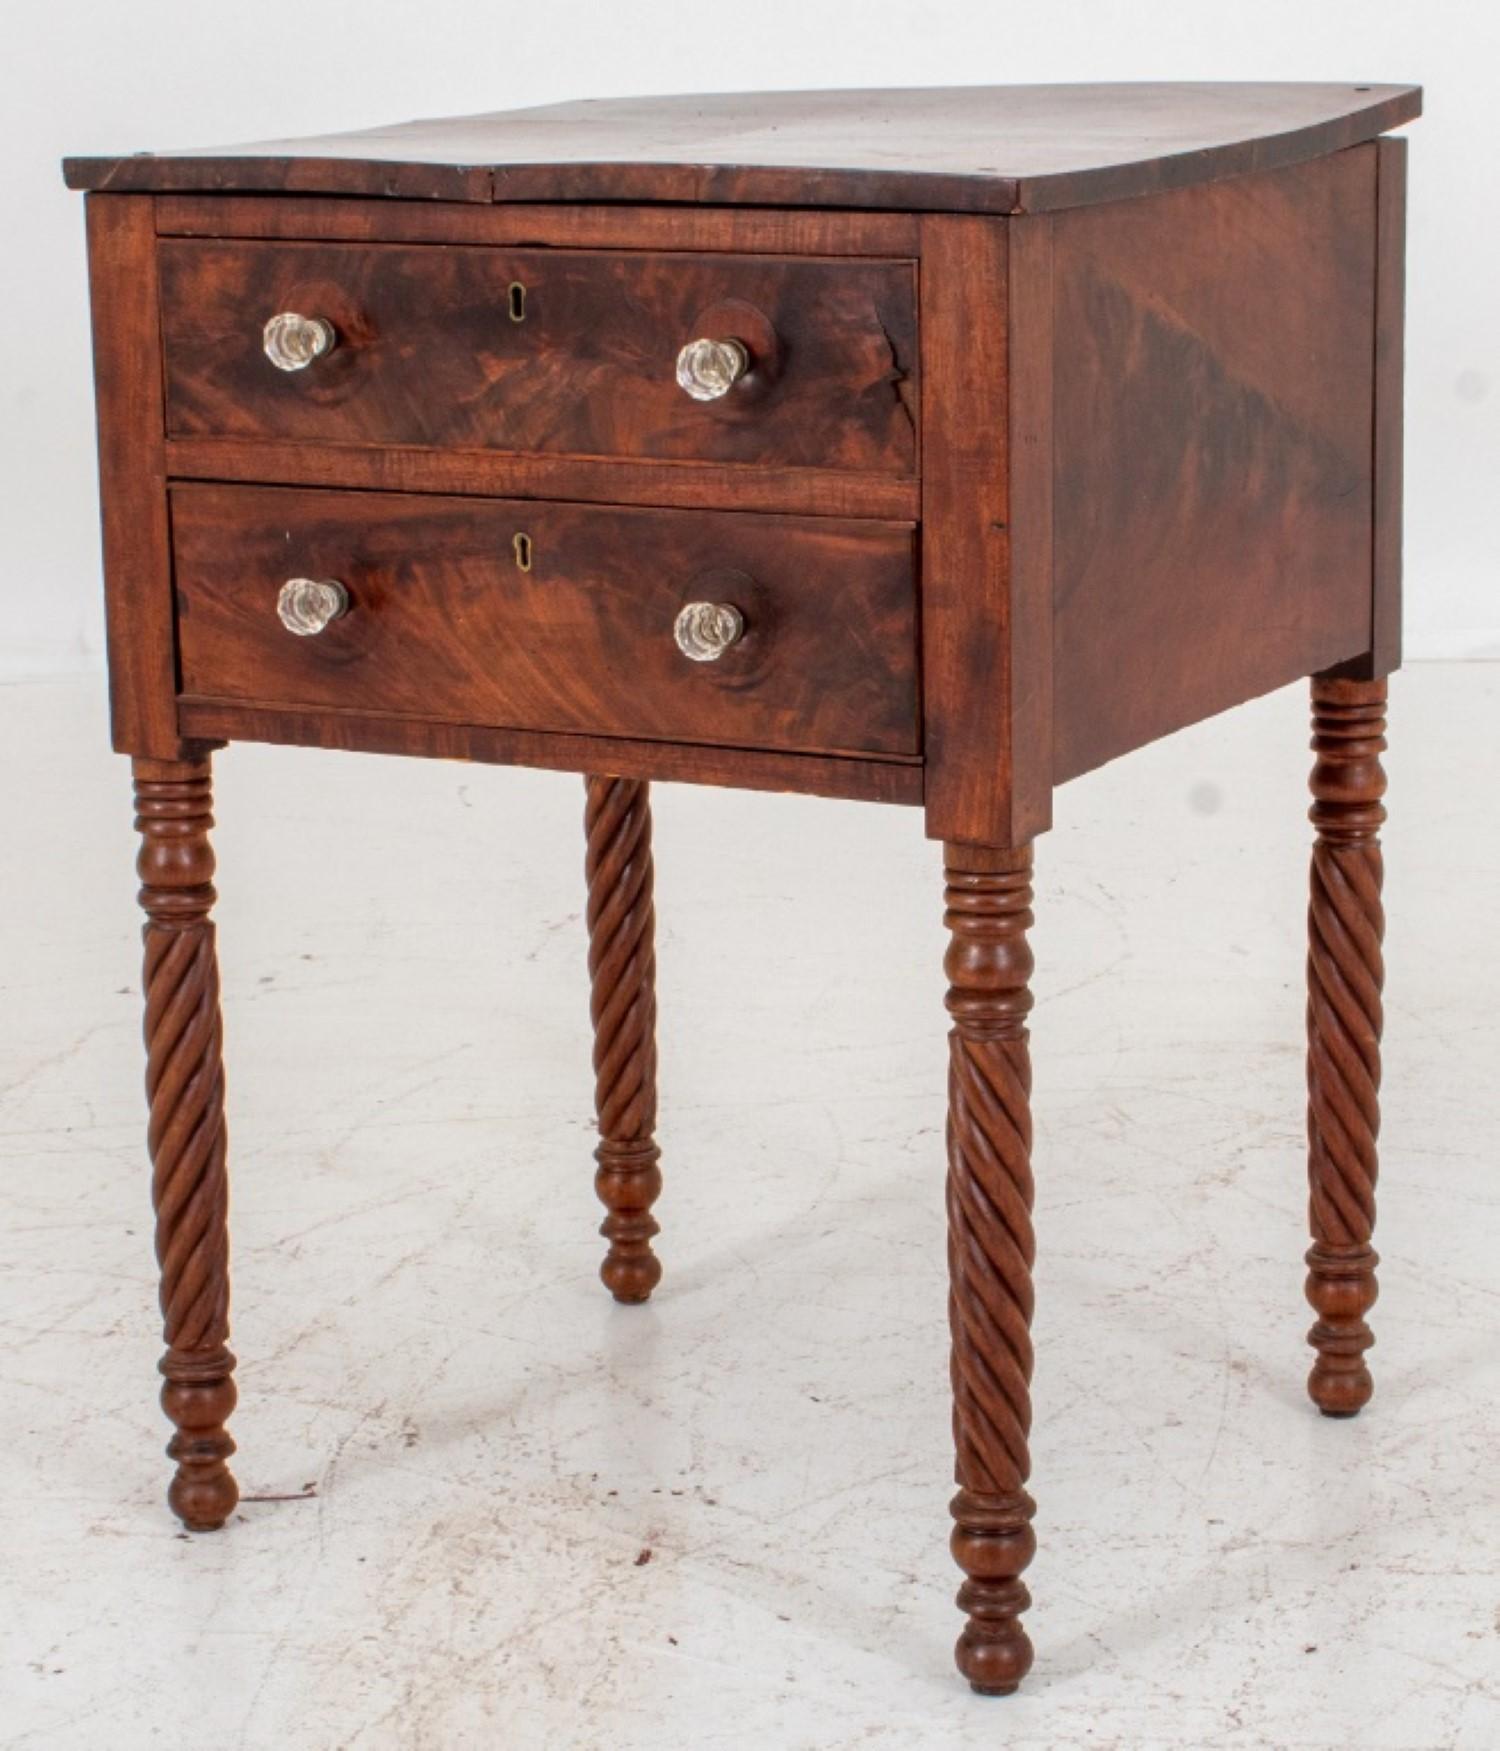 American Empire flame mahogany side table with two drawers above four twisted legs, with later cut glass pulls.

29 inches in height, 21.25 inches in width, and 19 inches in depth.